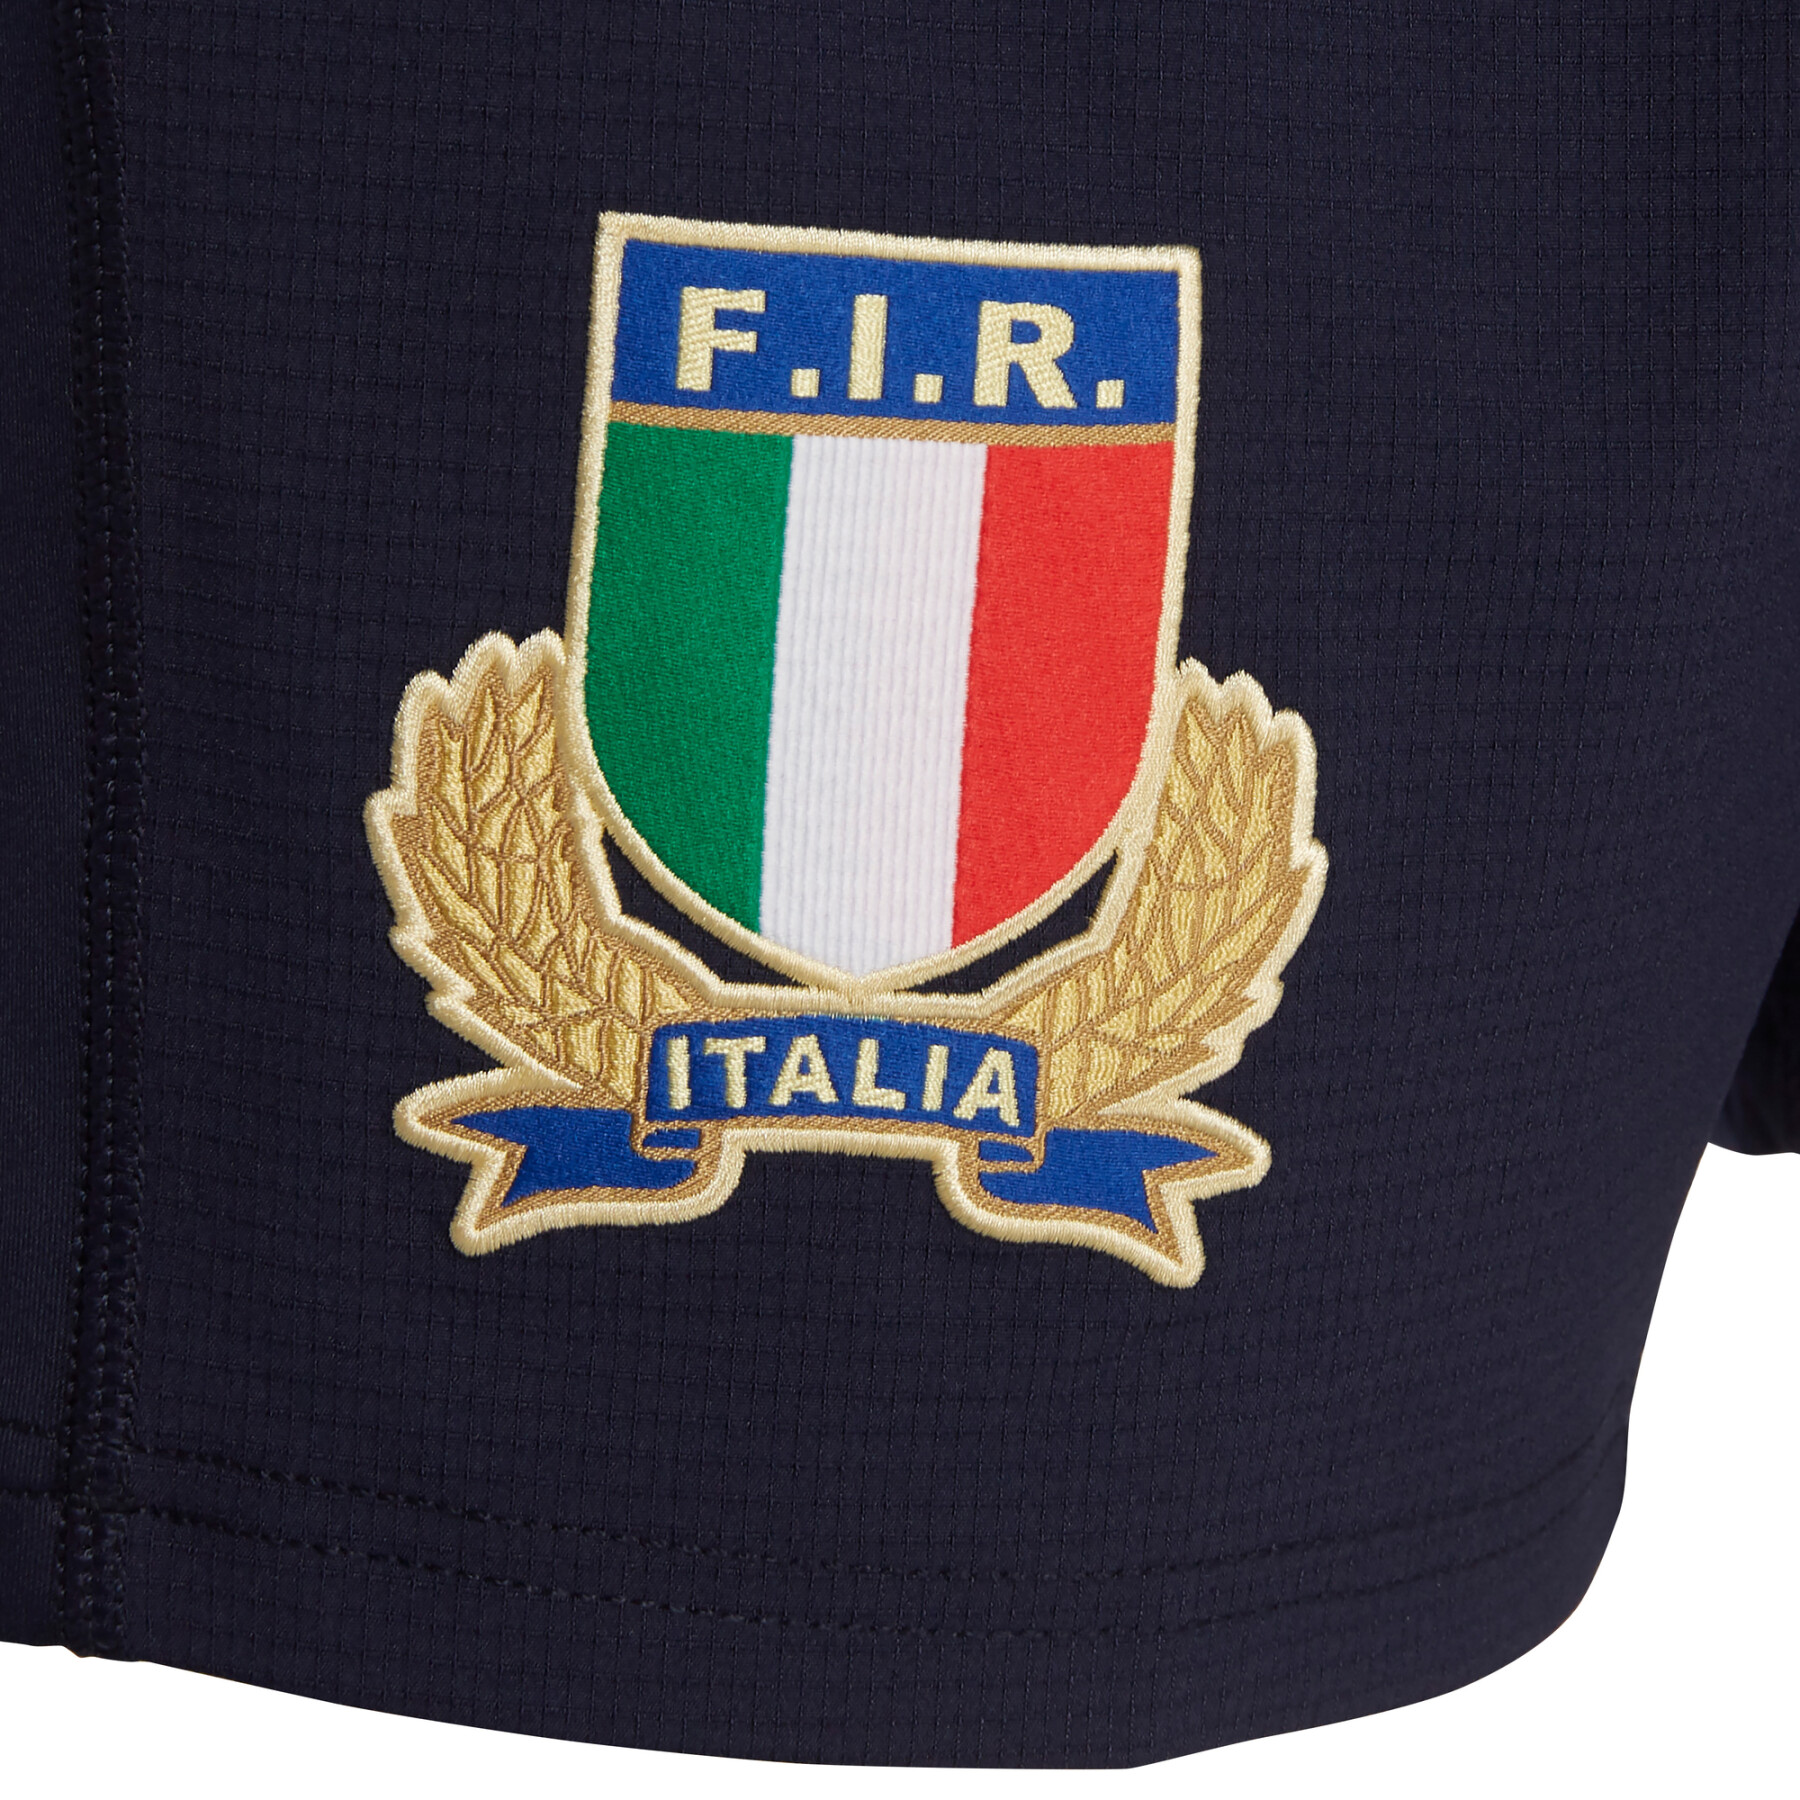 Outdoor shorts Italie rugby 2019